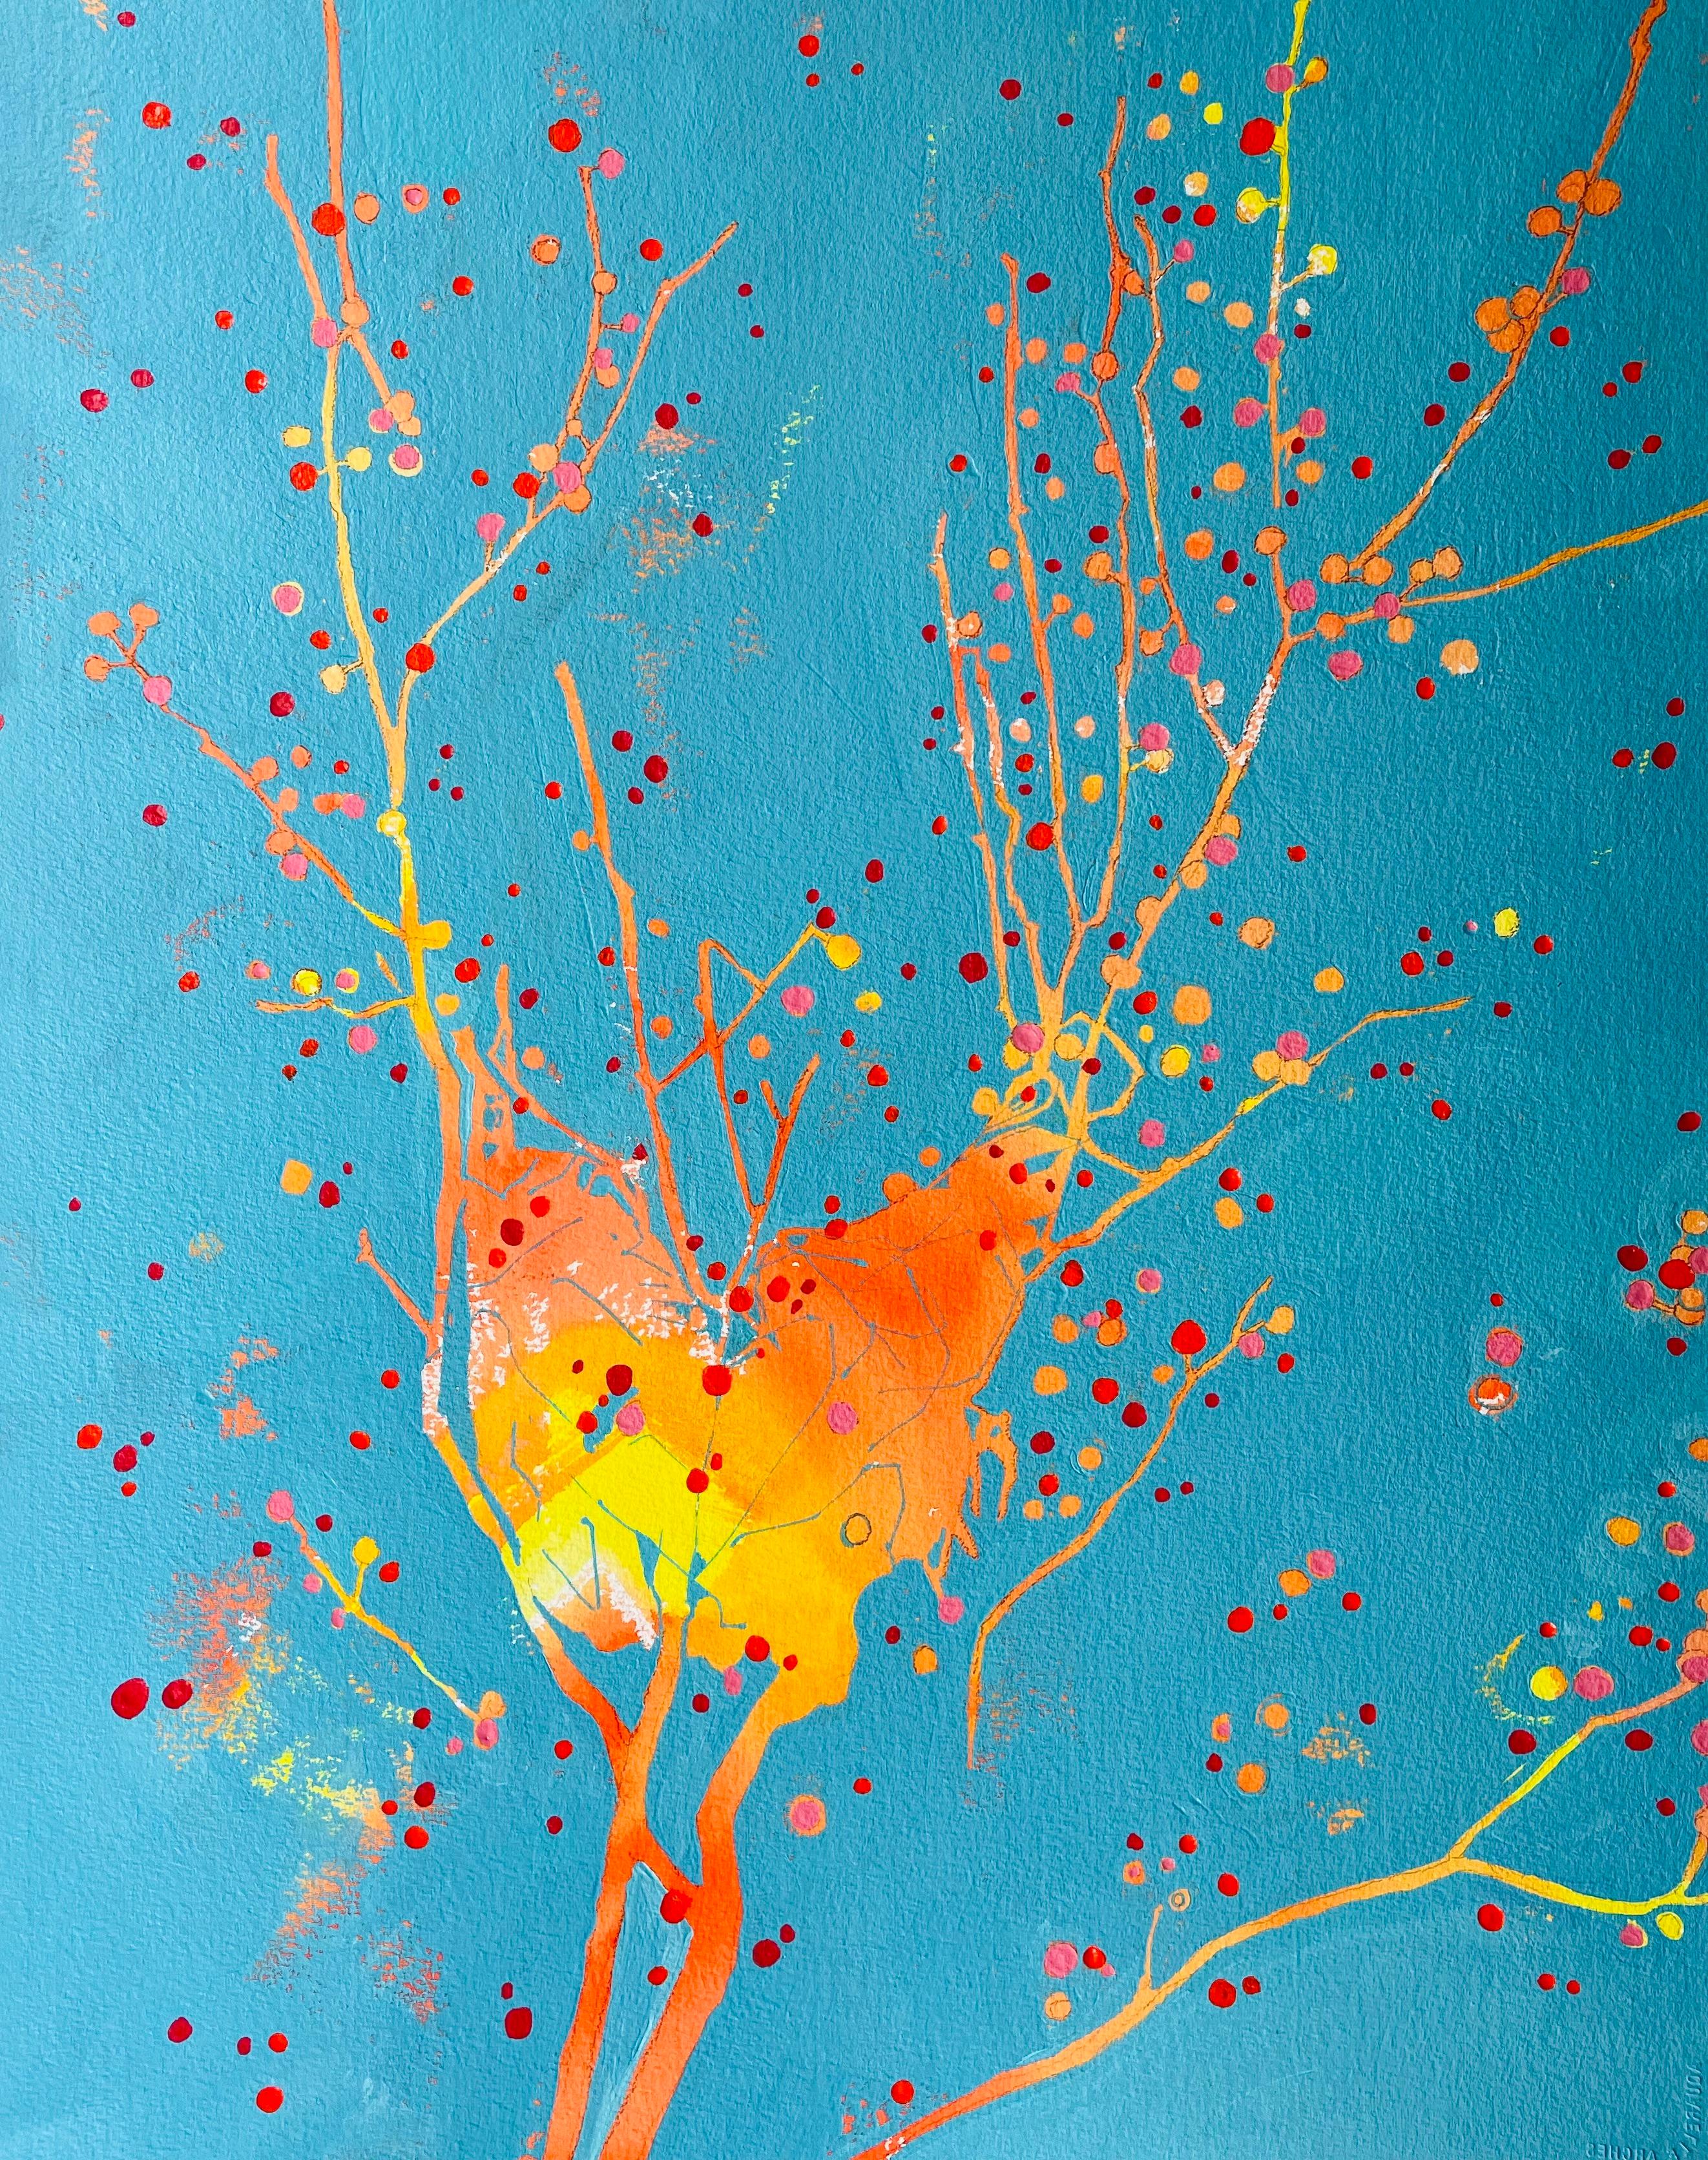 Deirdre Murphy Landscape Painting - Nugget: abstract painting of bird nest in tree: red & orange w/ turquoise blue